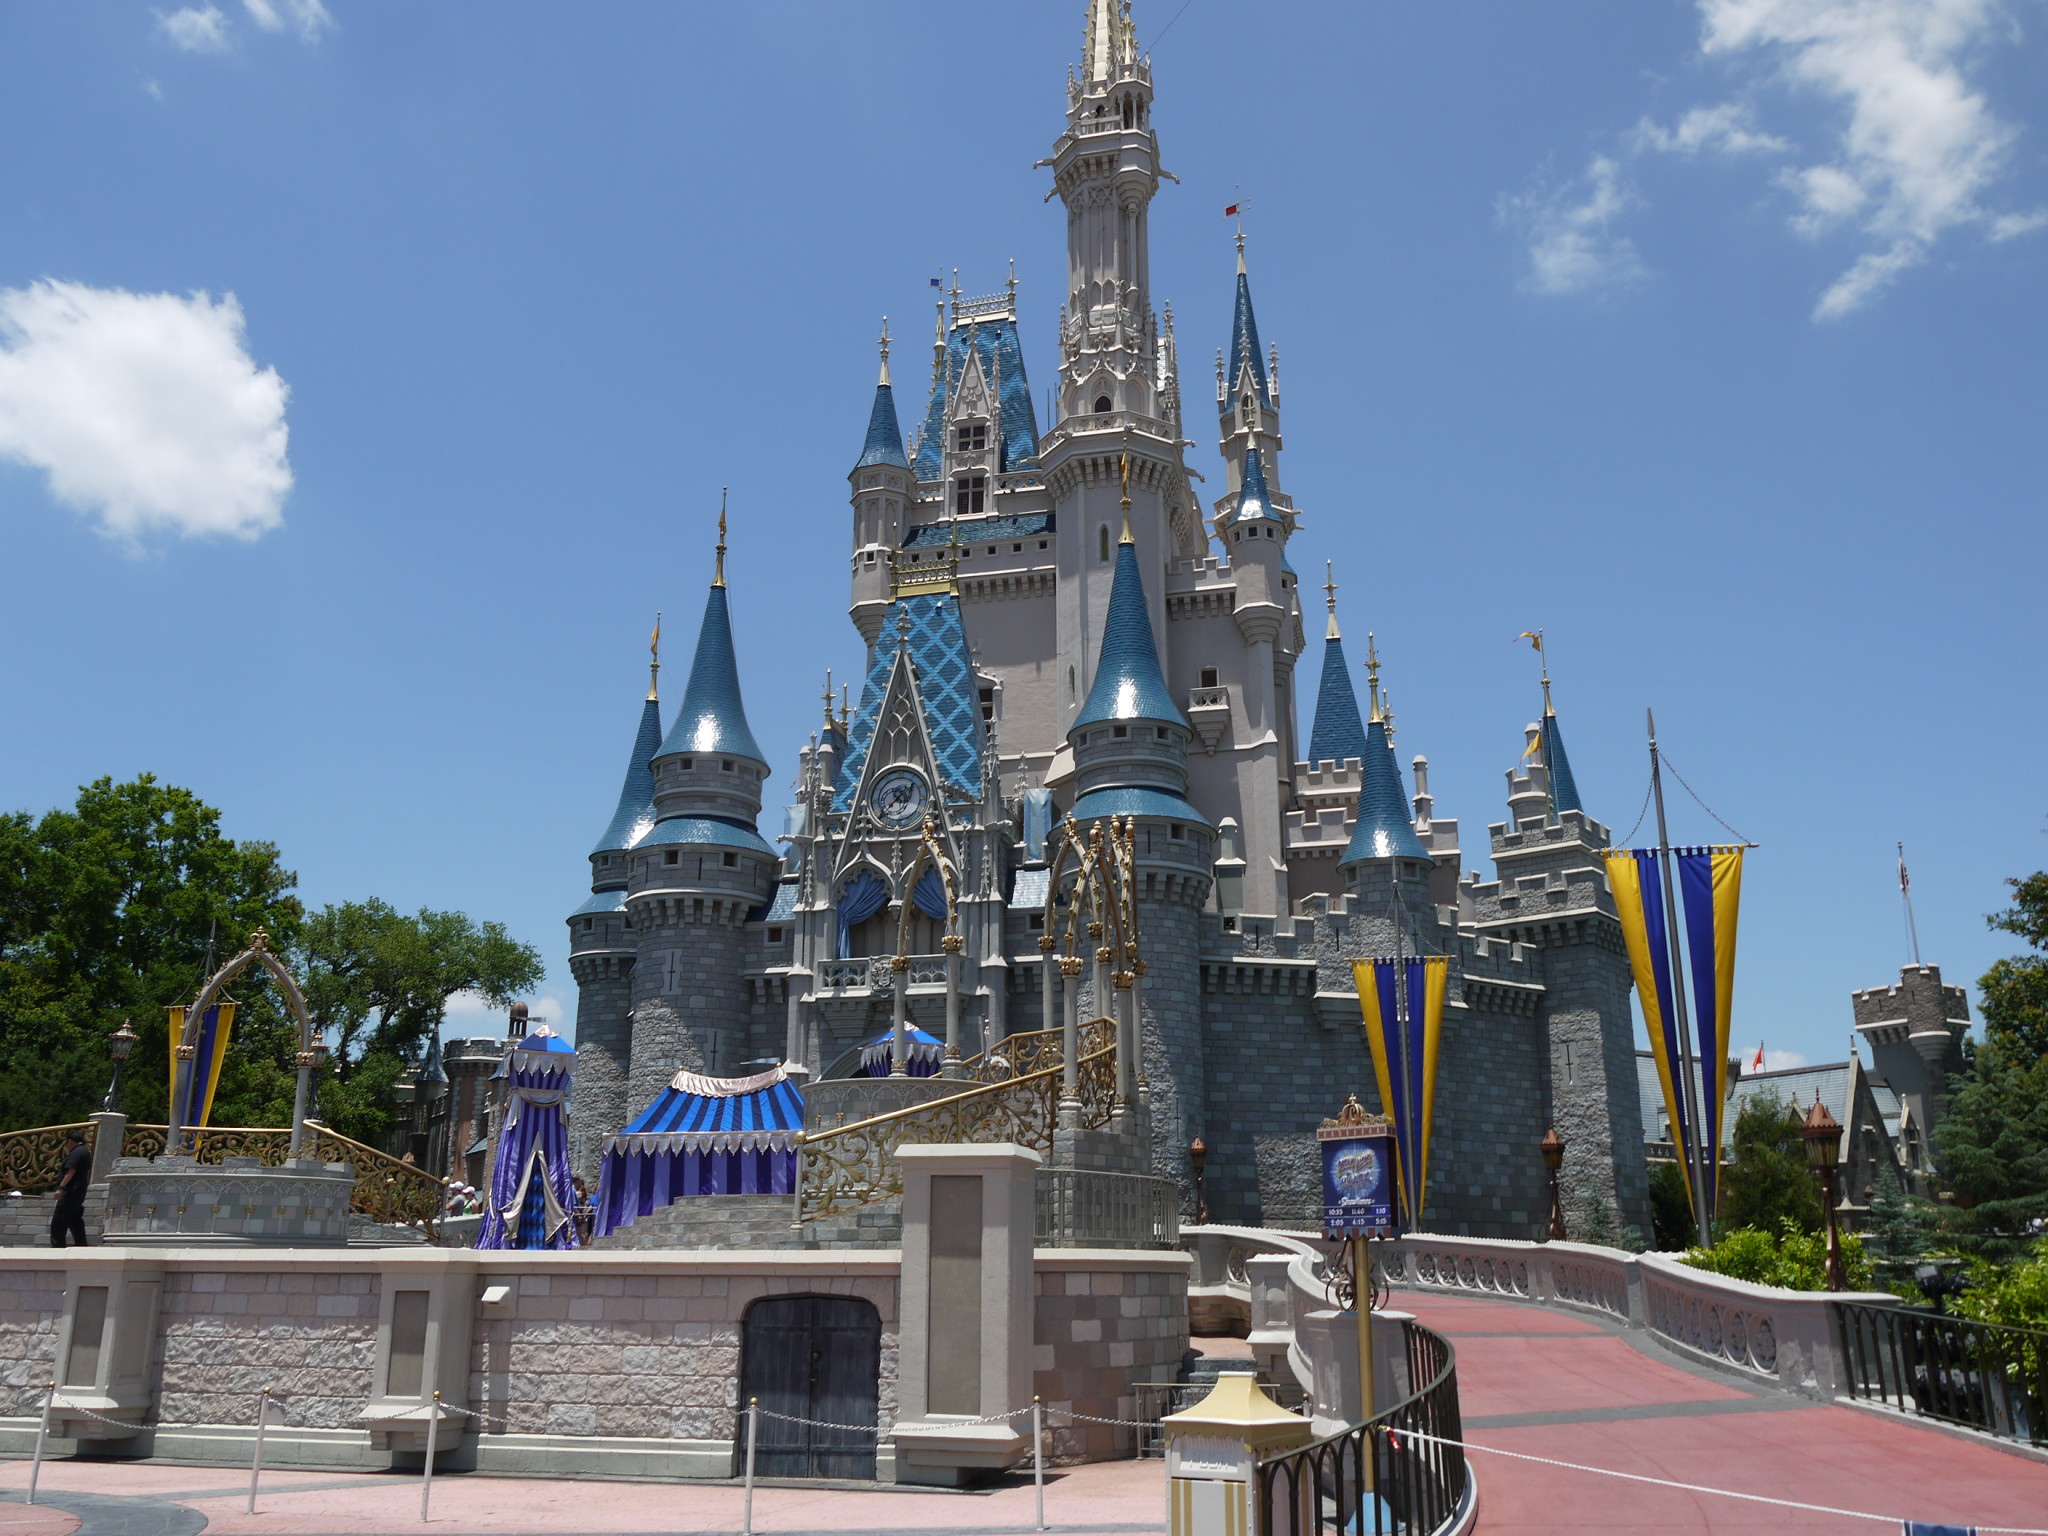 Smoking Spots to be Reduced at the Magic Kingdom